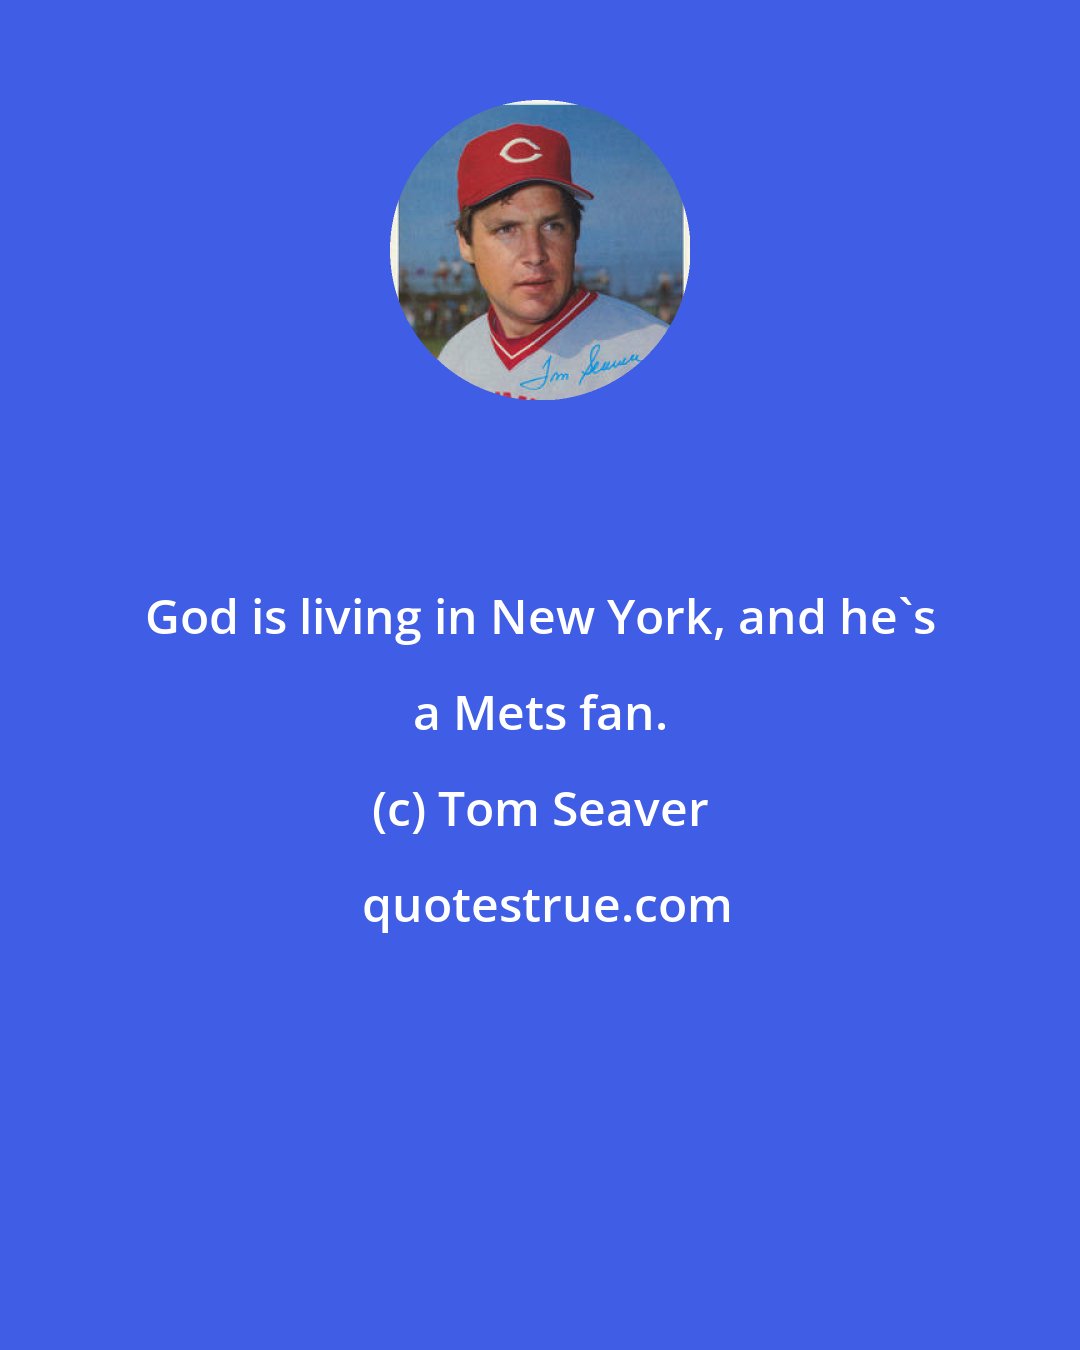 Tom Seaver: God is living in New York, and he's a Mets fan.